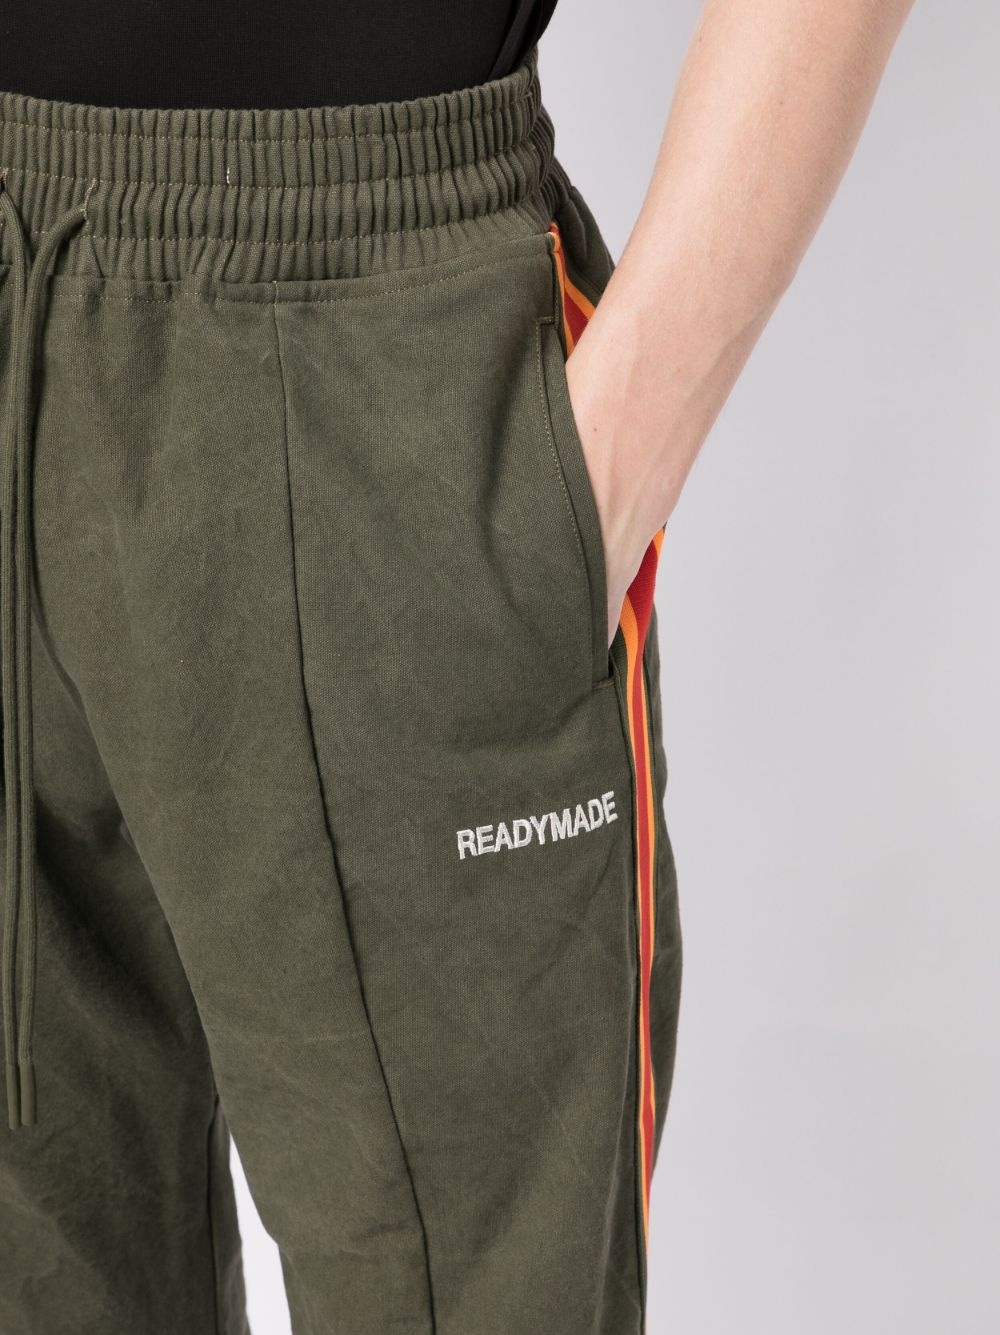 Readymade logo-embroidered striped track pants | REVERSIBLE